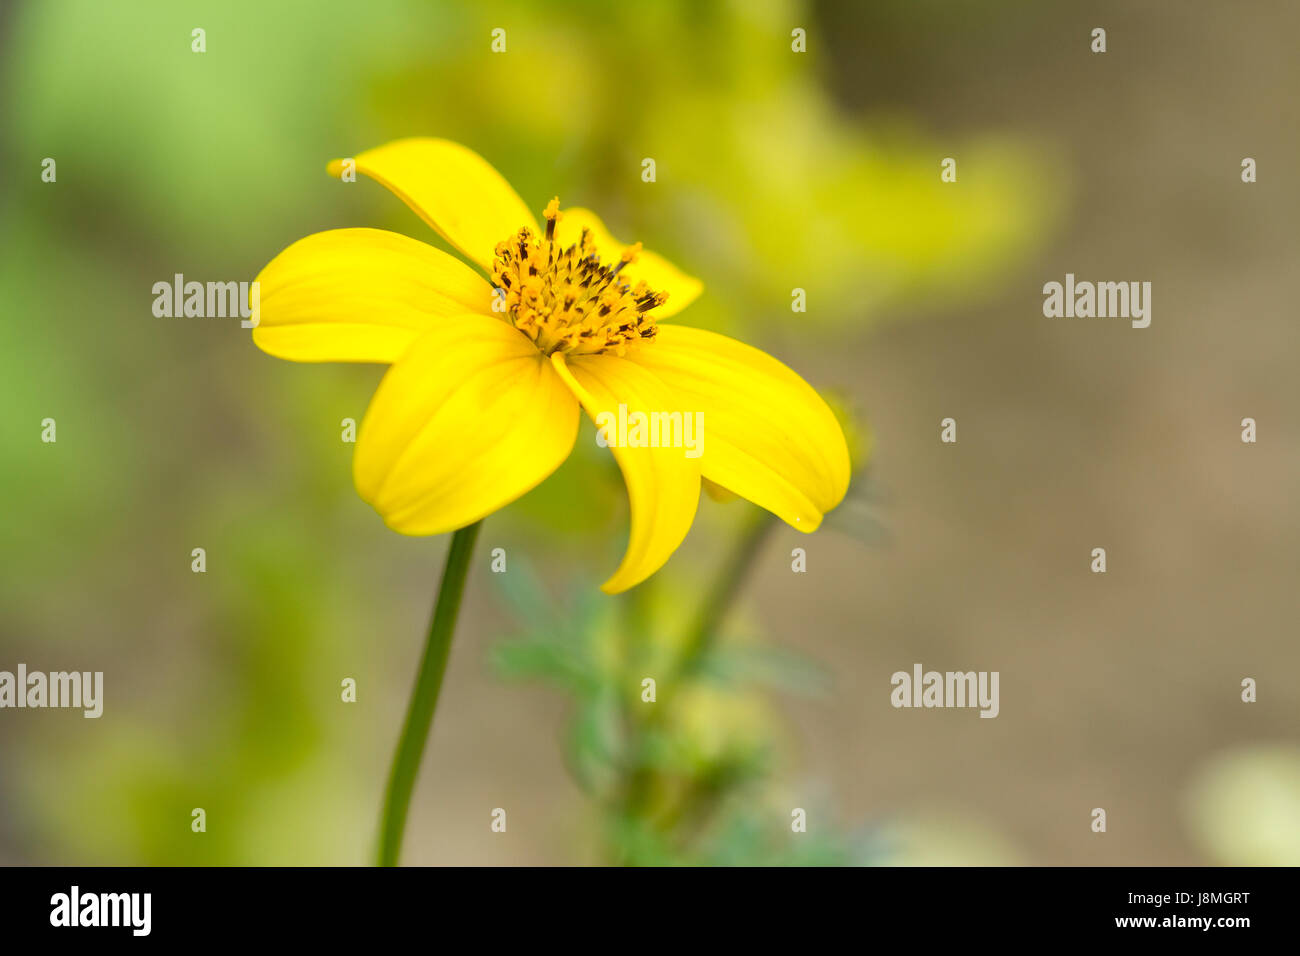 Yellow Daisy Flower growing in an English cottage garden Stock Photo